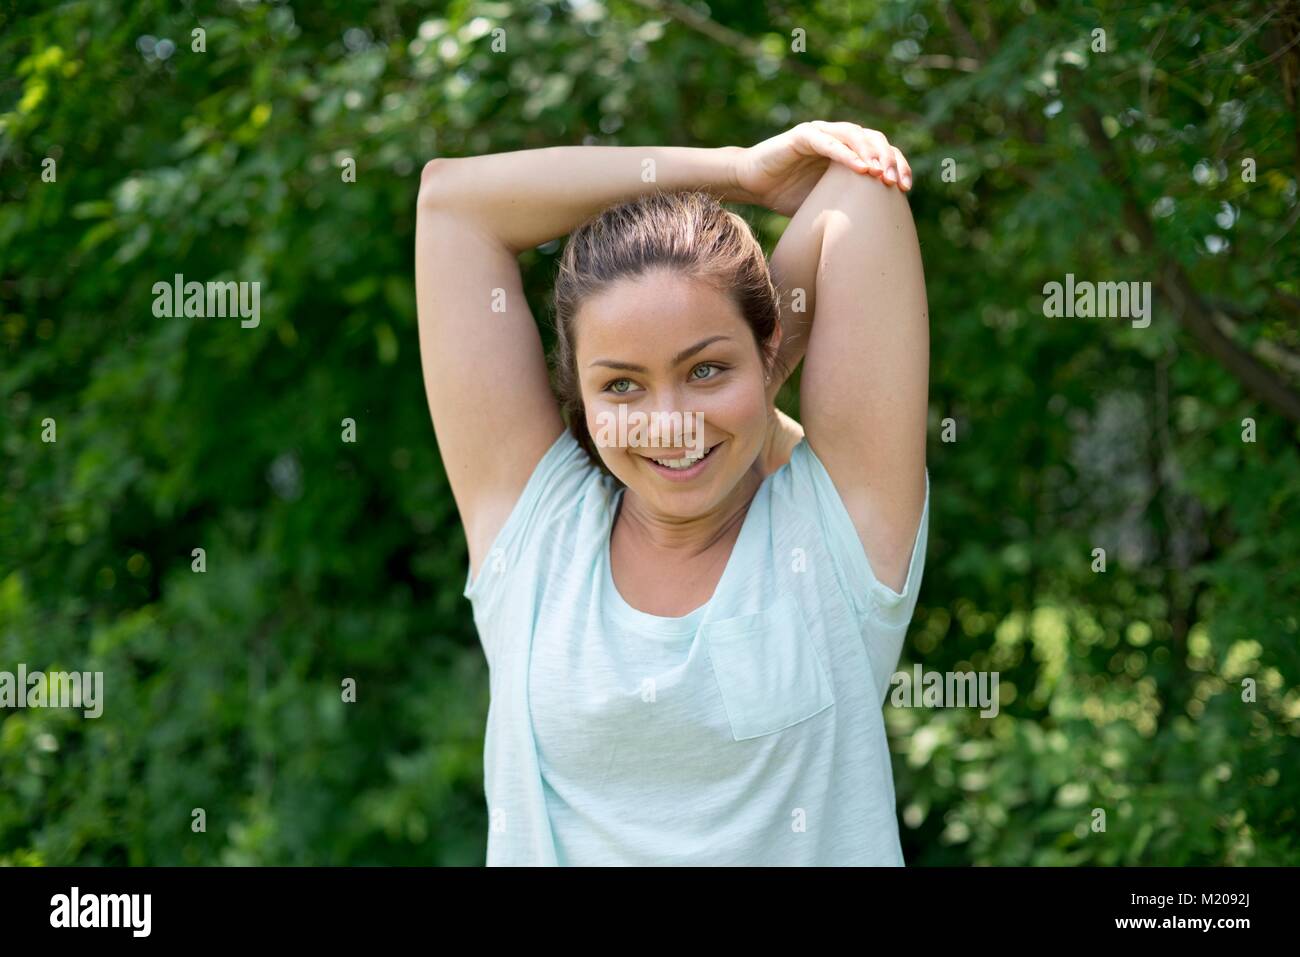 Young woman stretching before exercise. Stock Photo